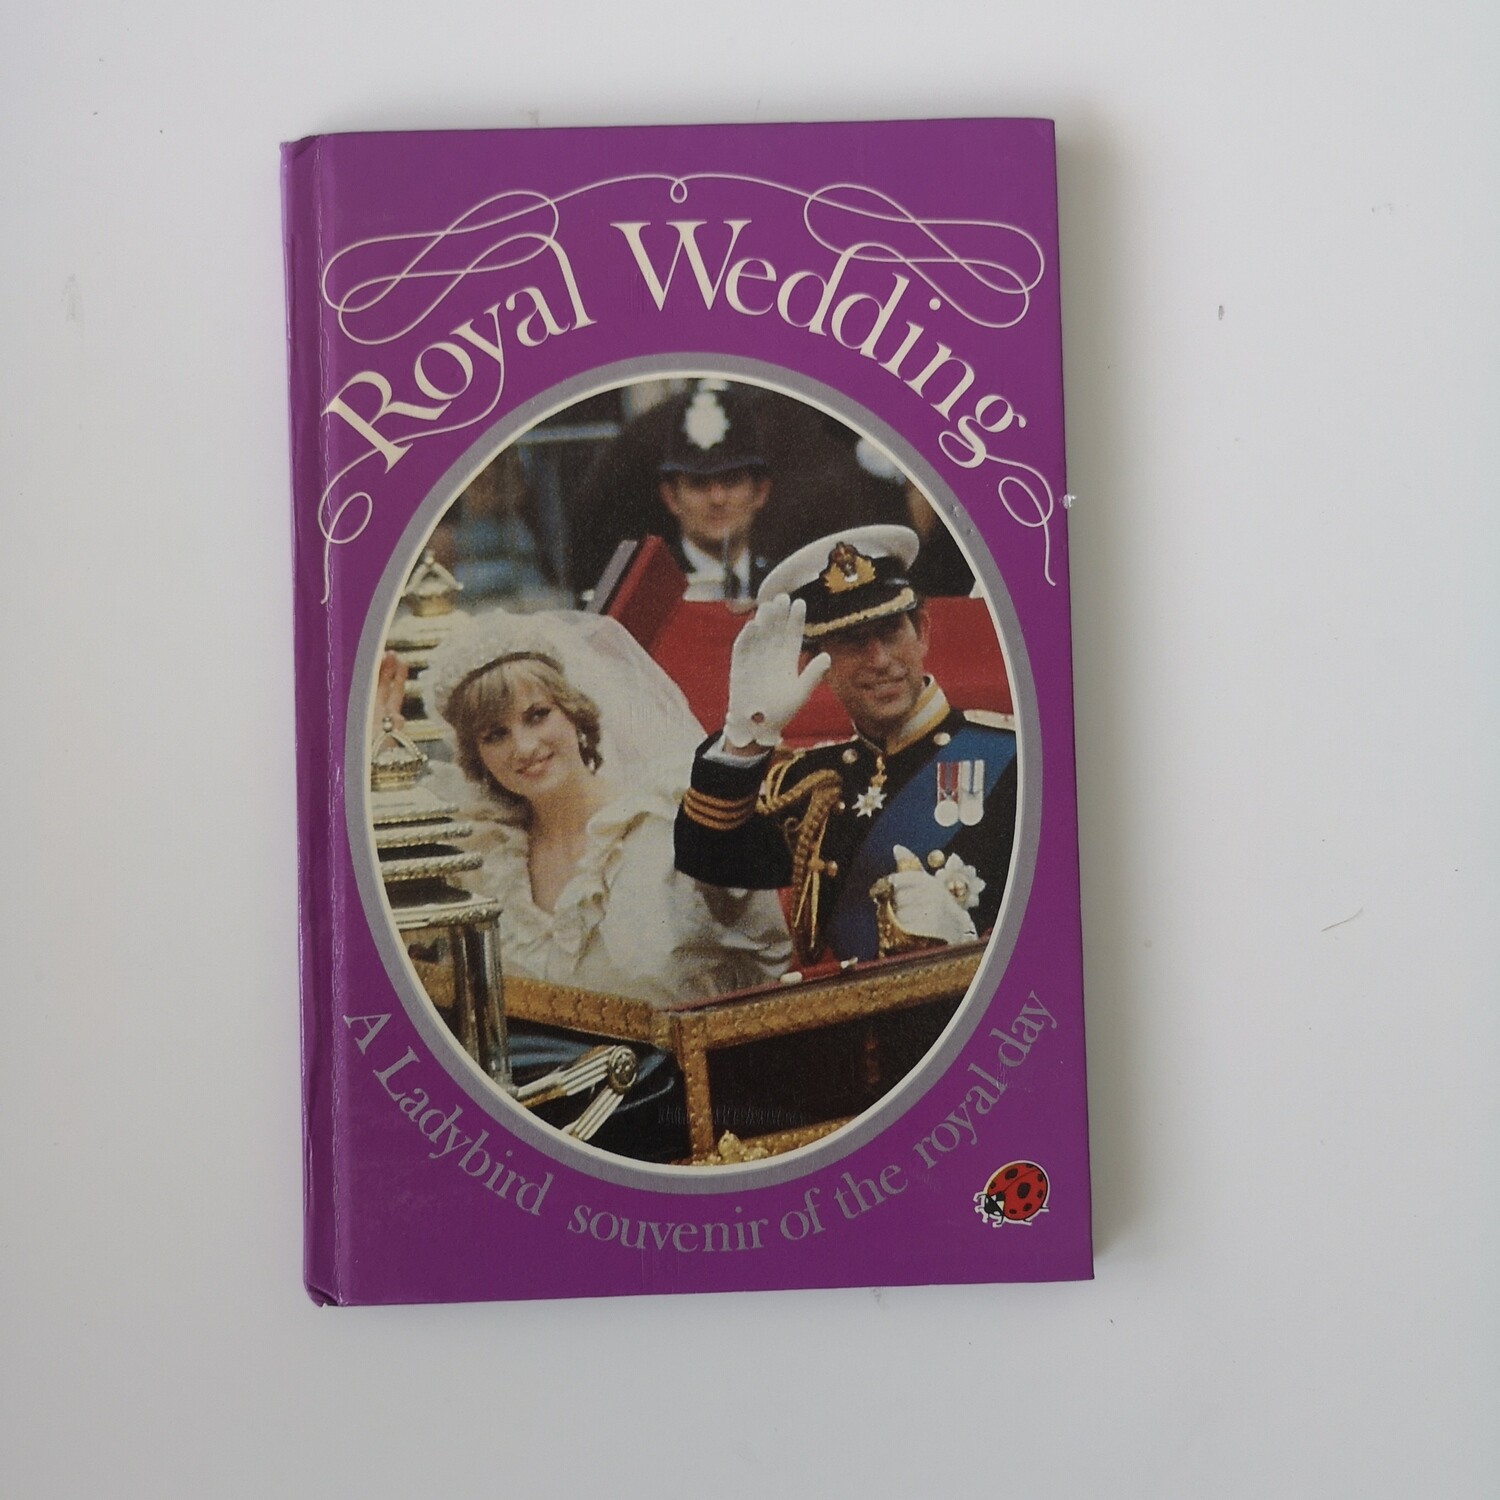 The Royal Wedding Notebook - Charles and Diana